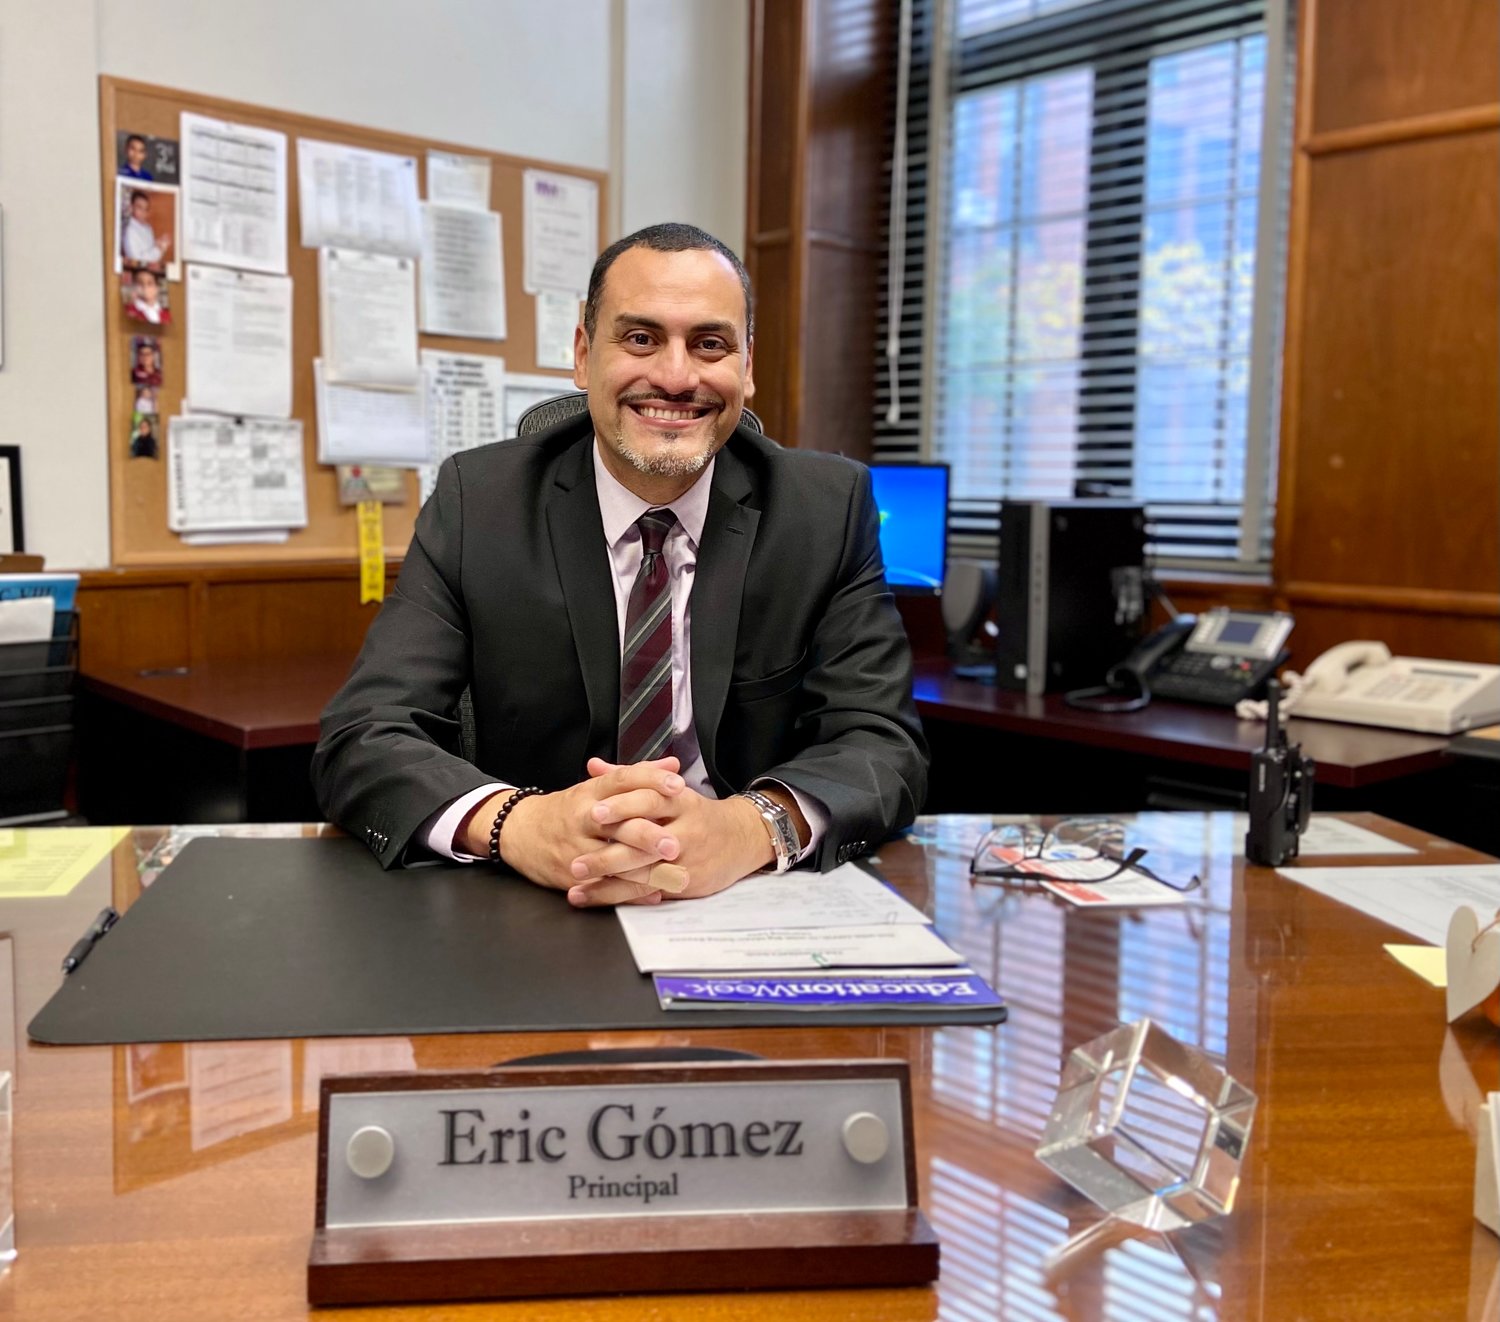 Gomez is excited about his new job as an assistant superintendent in the Bellmore-Merrick Central High School District.